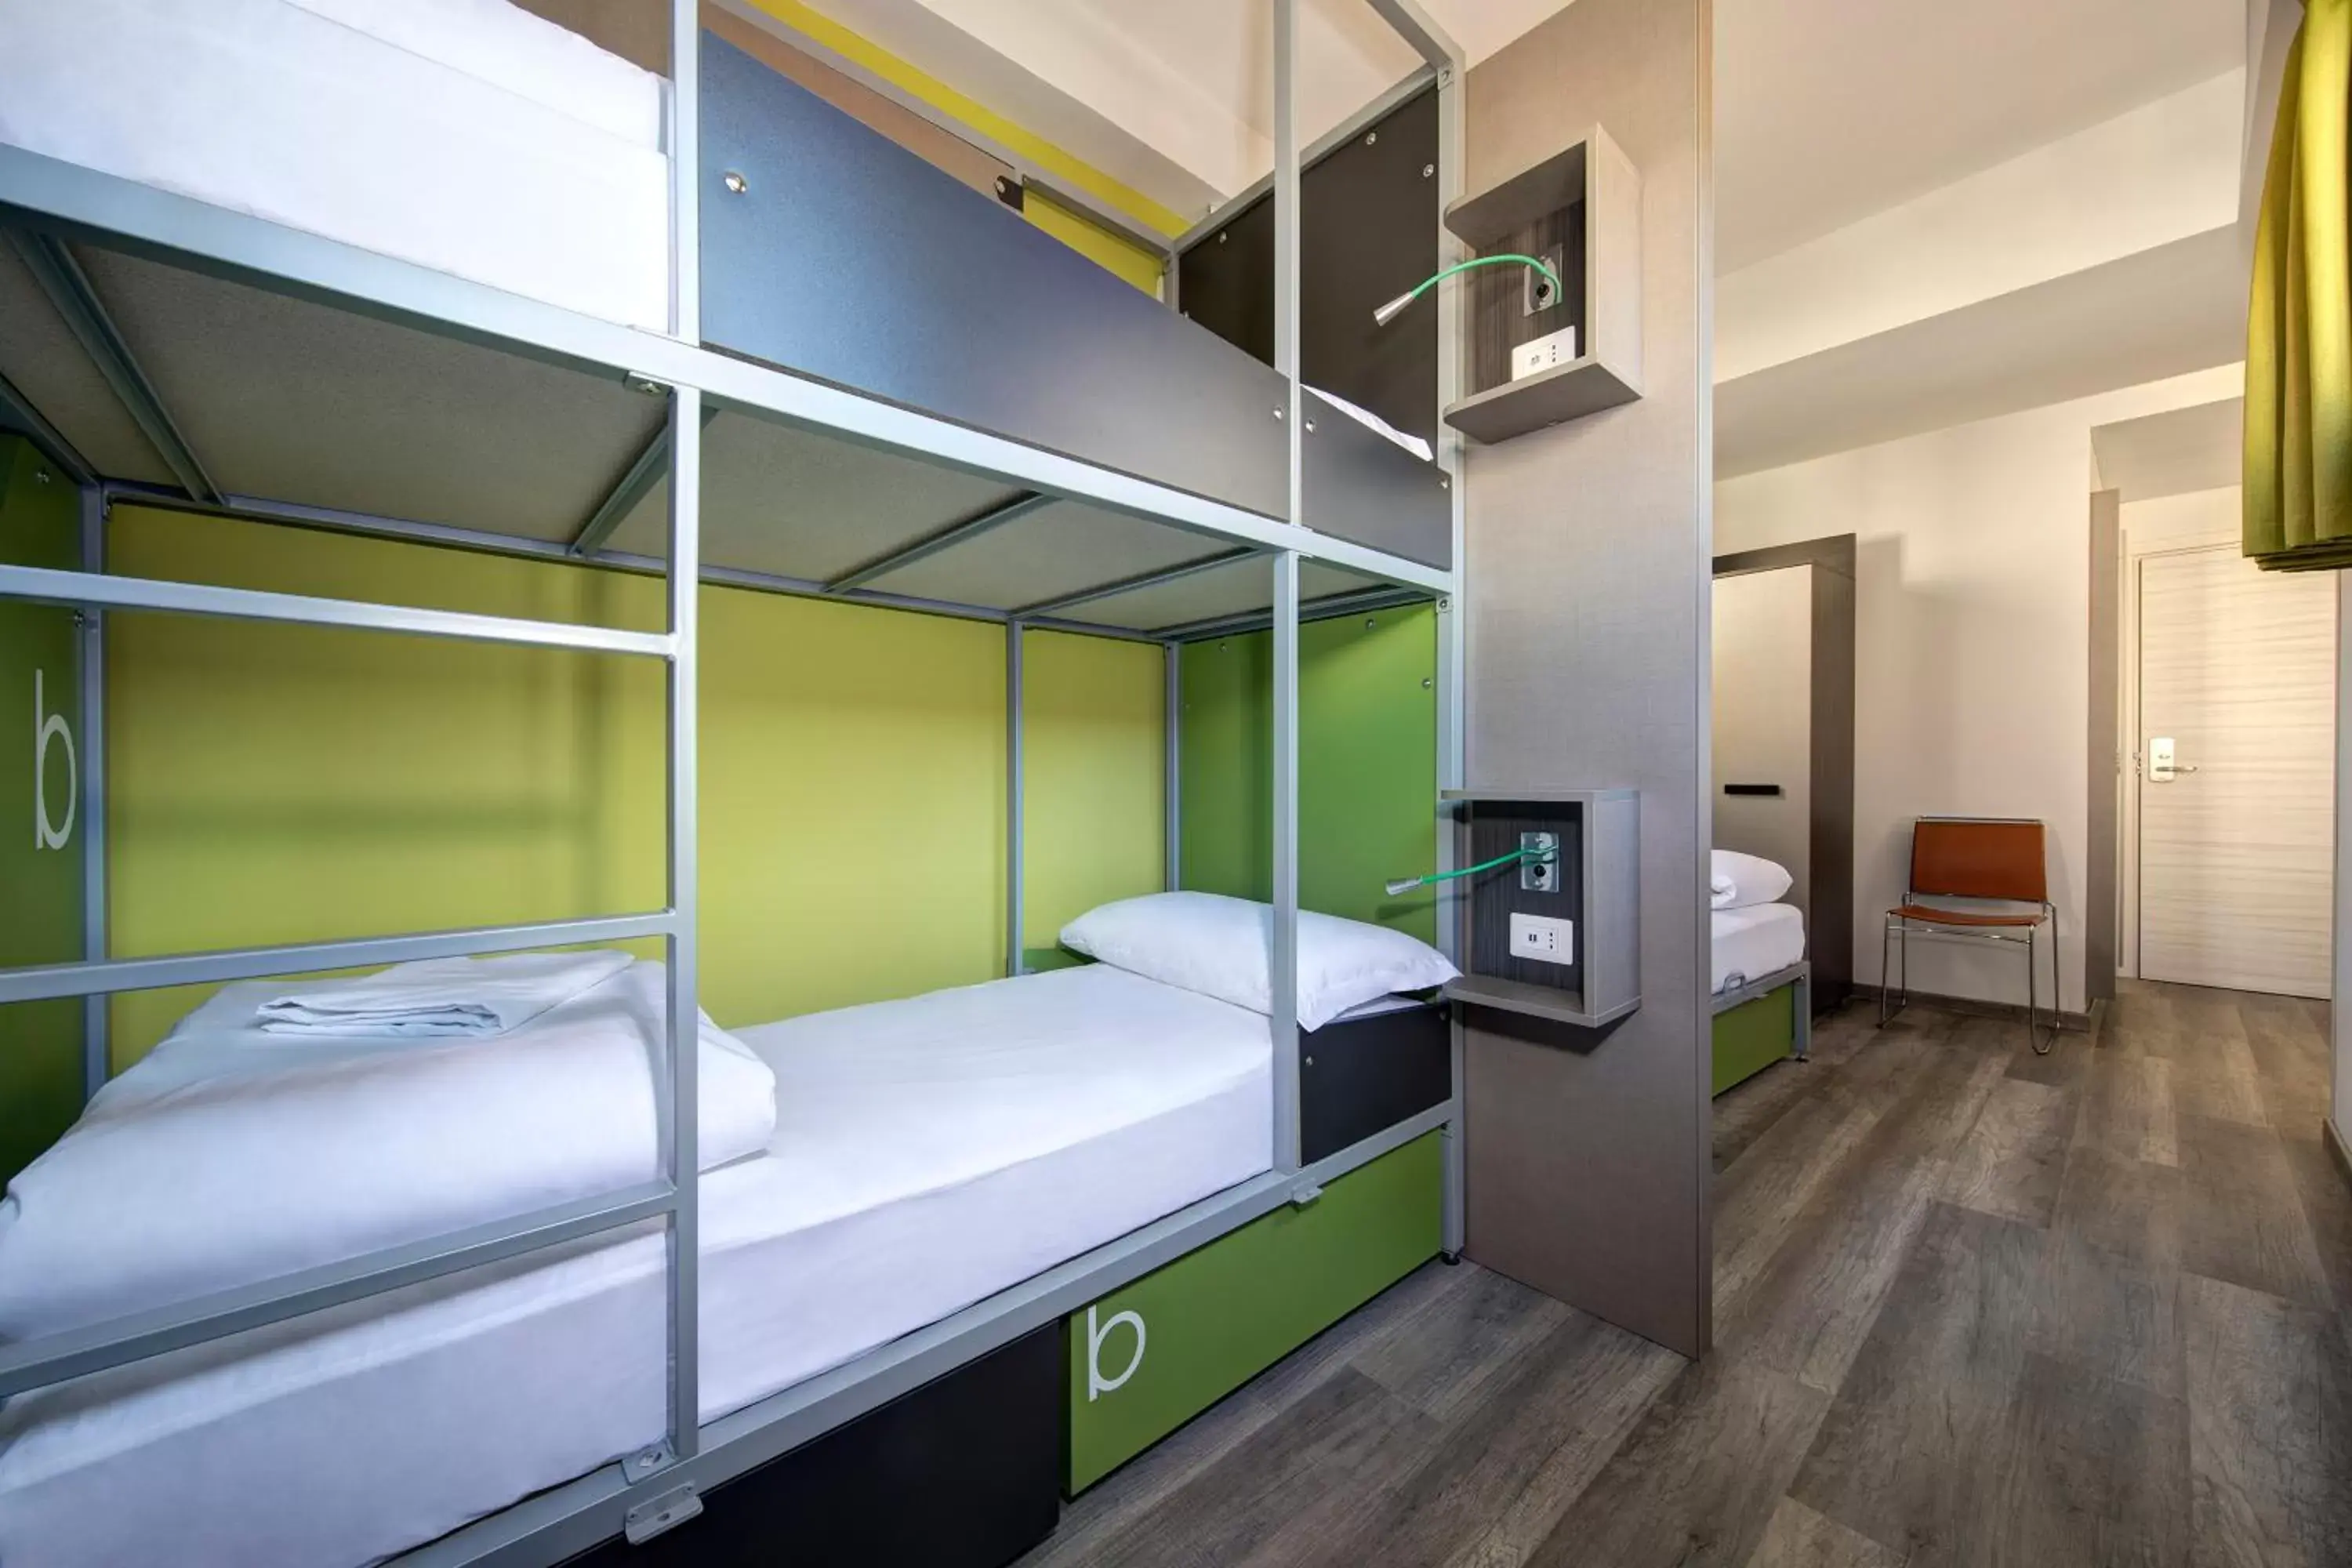 Bunk Bed in Female Dormitory Room   in The RomeHello